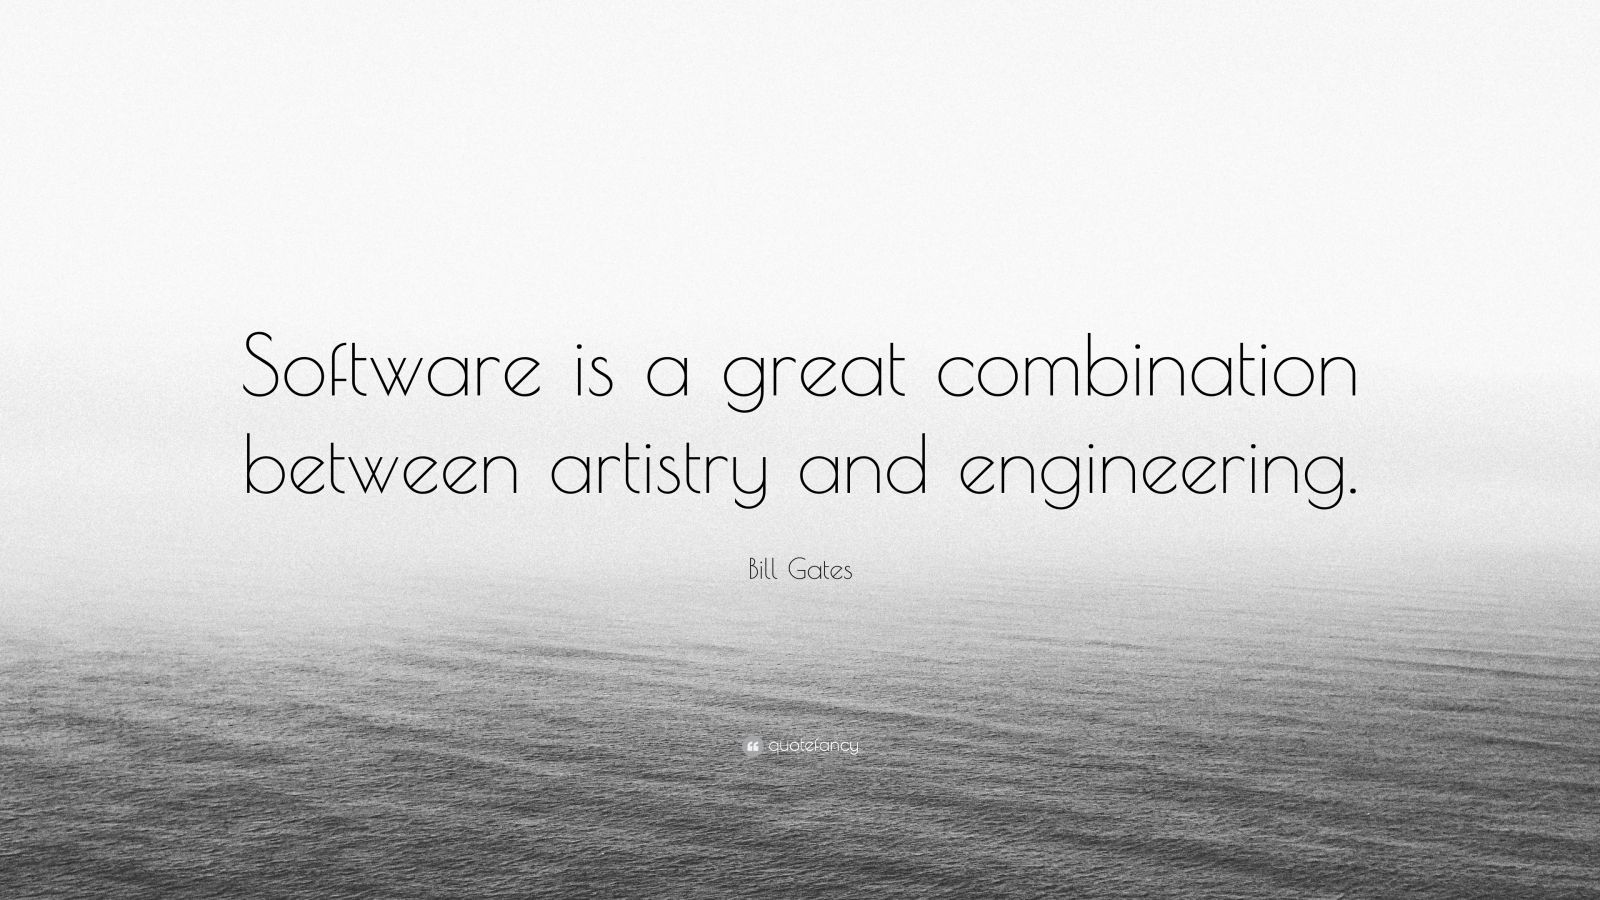 Bill Gates Quote: “Software is a great combination between artistry and